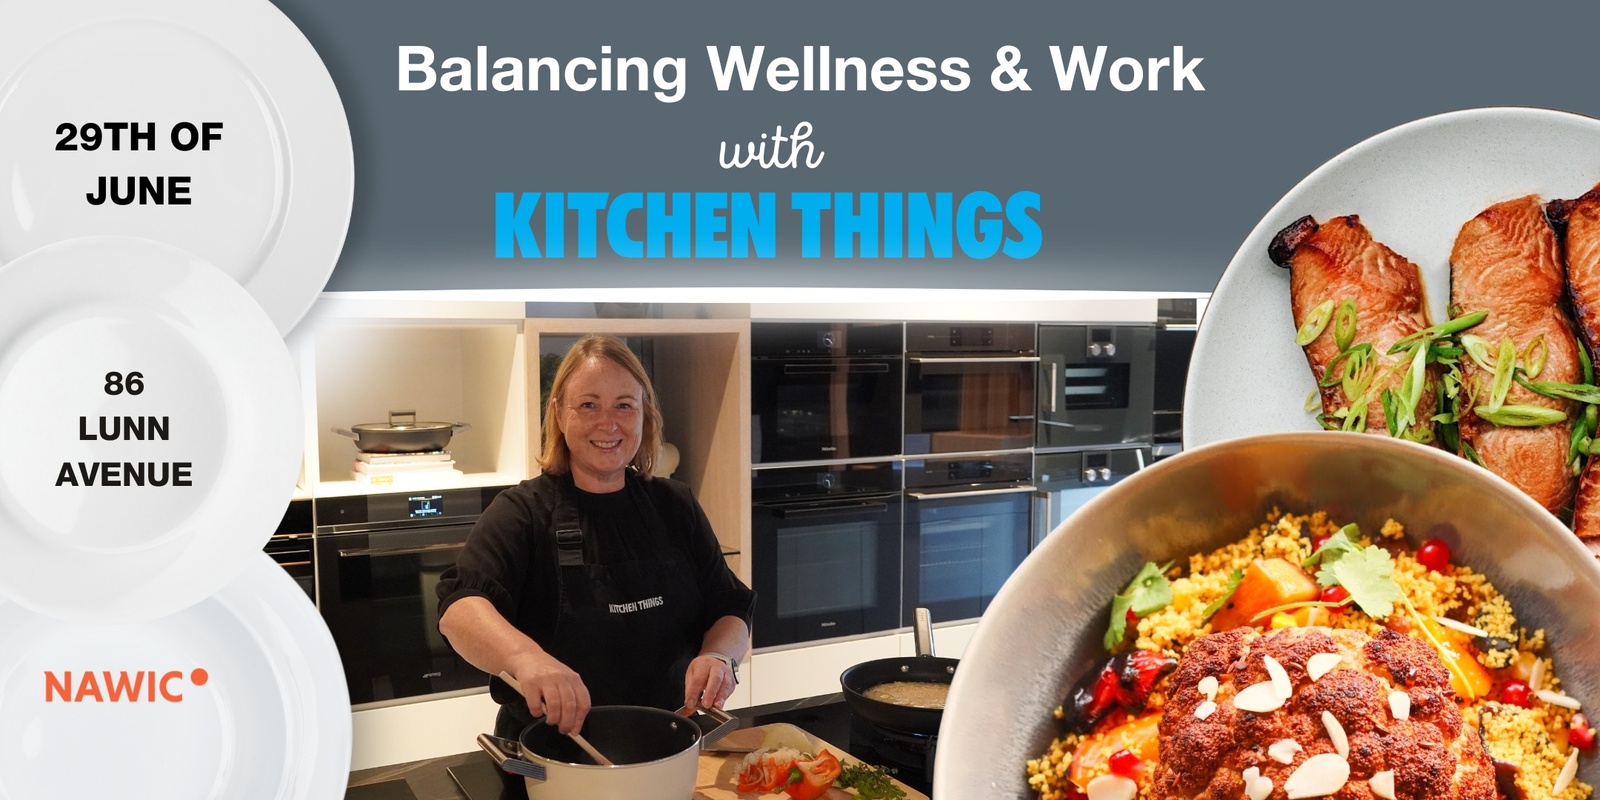 NAWIC Auckland Balancing Wellness & Work with Kitchen Things 